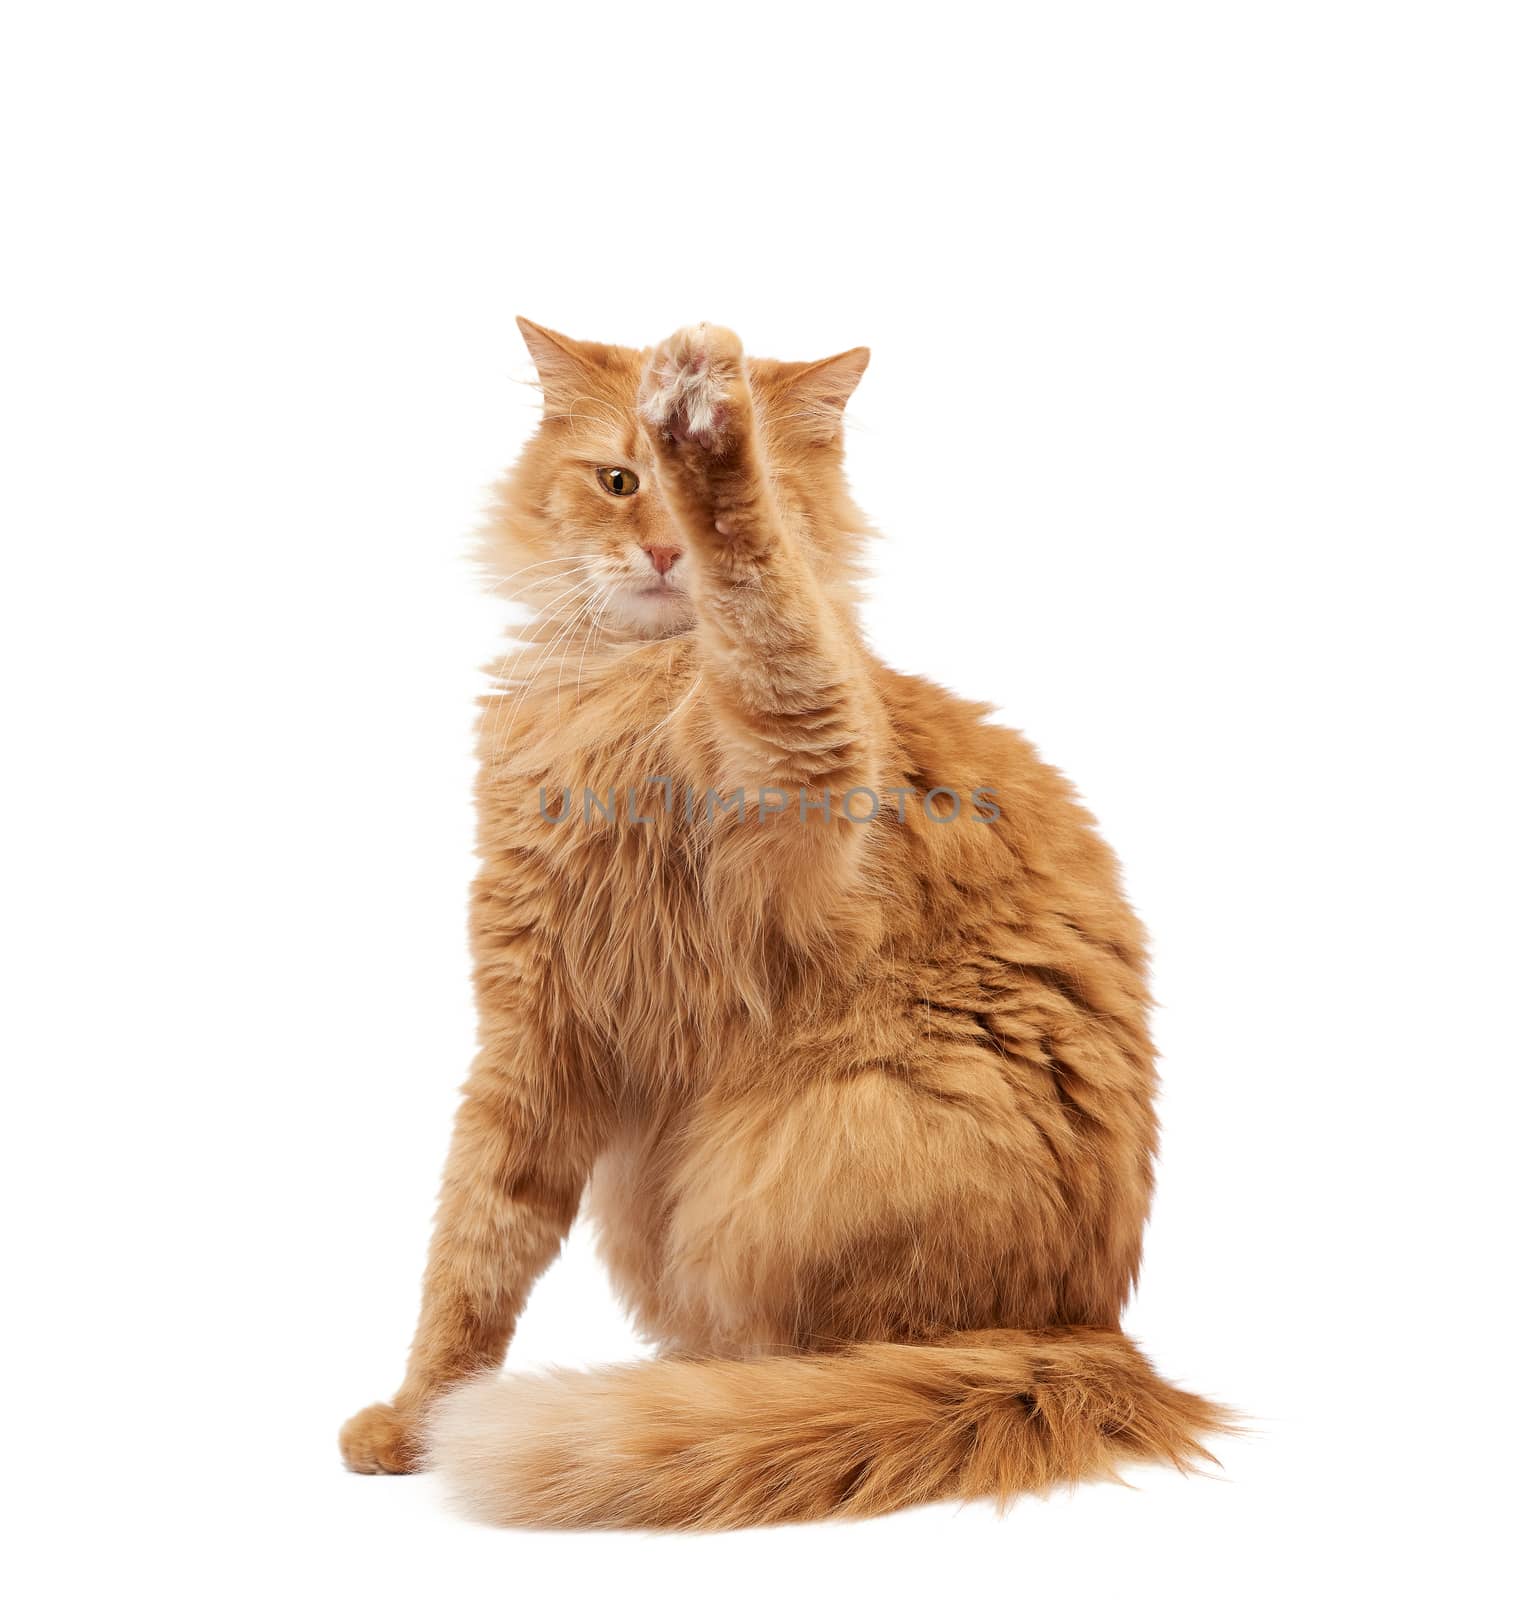 Cute adult fluffy red cat sitting and raised its front paws up,  by ndanko